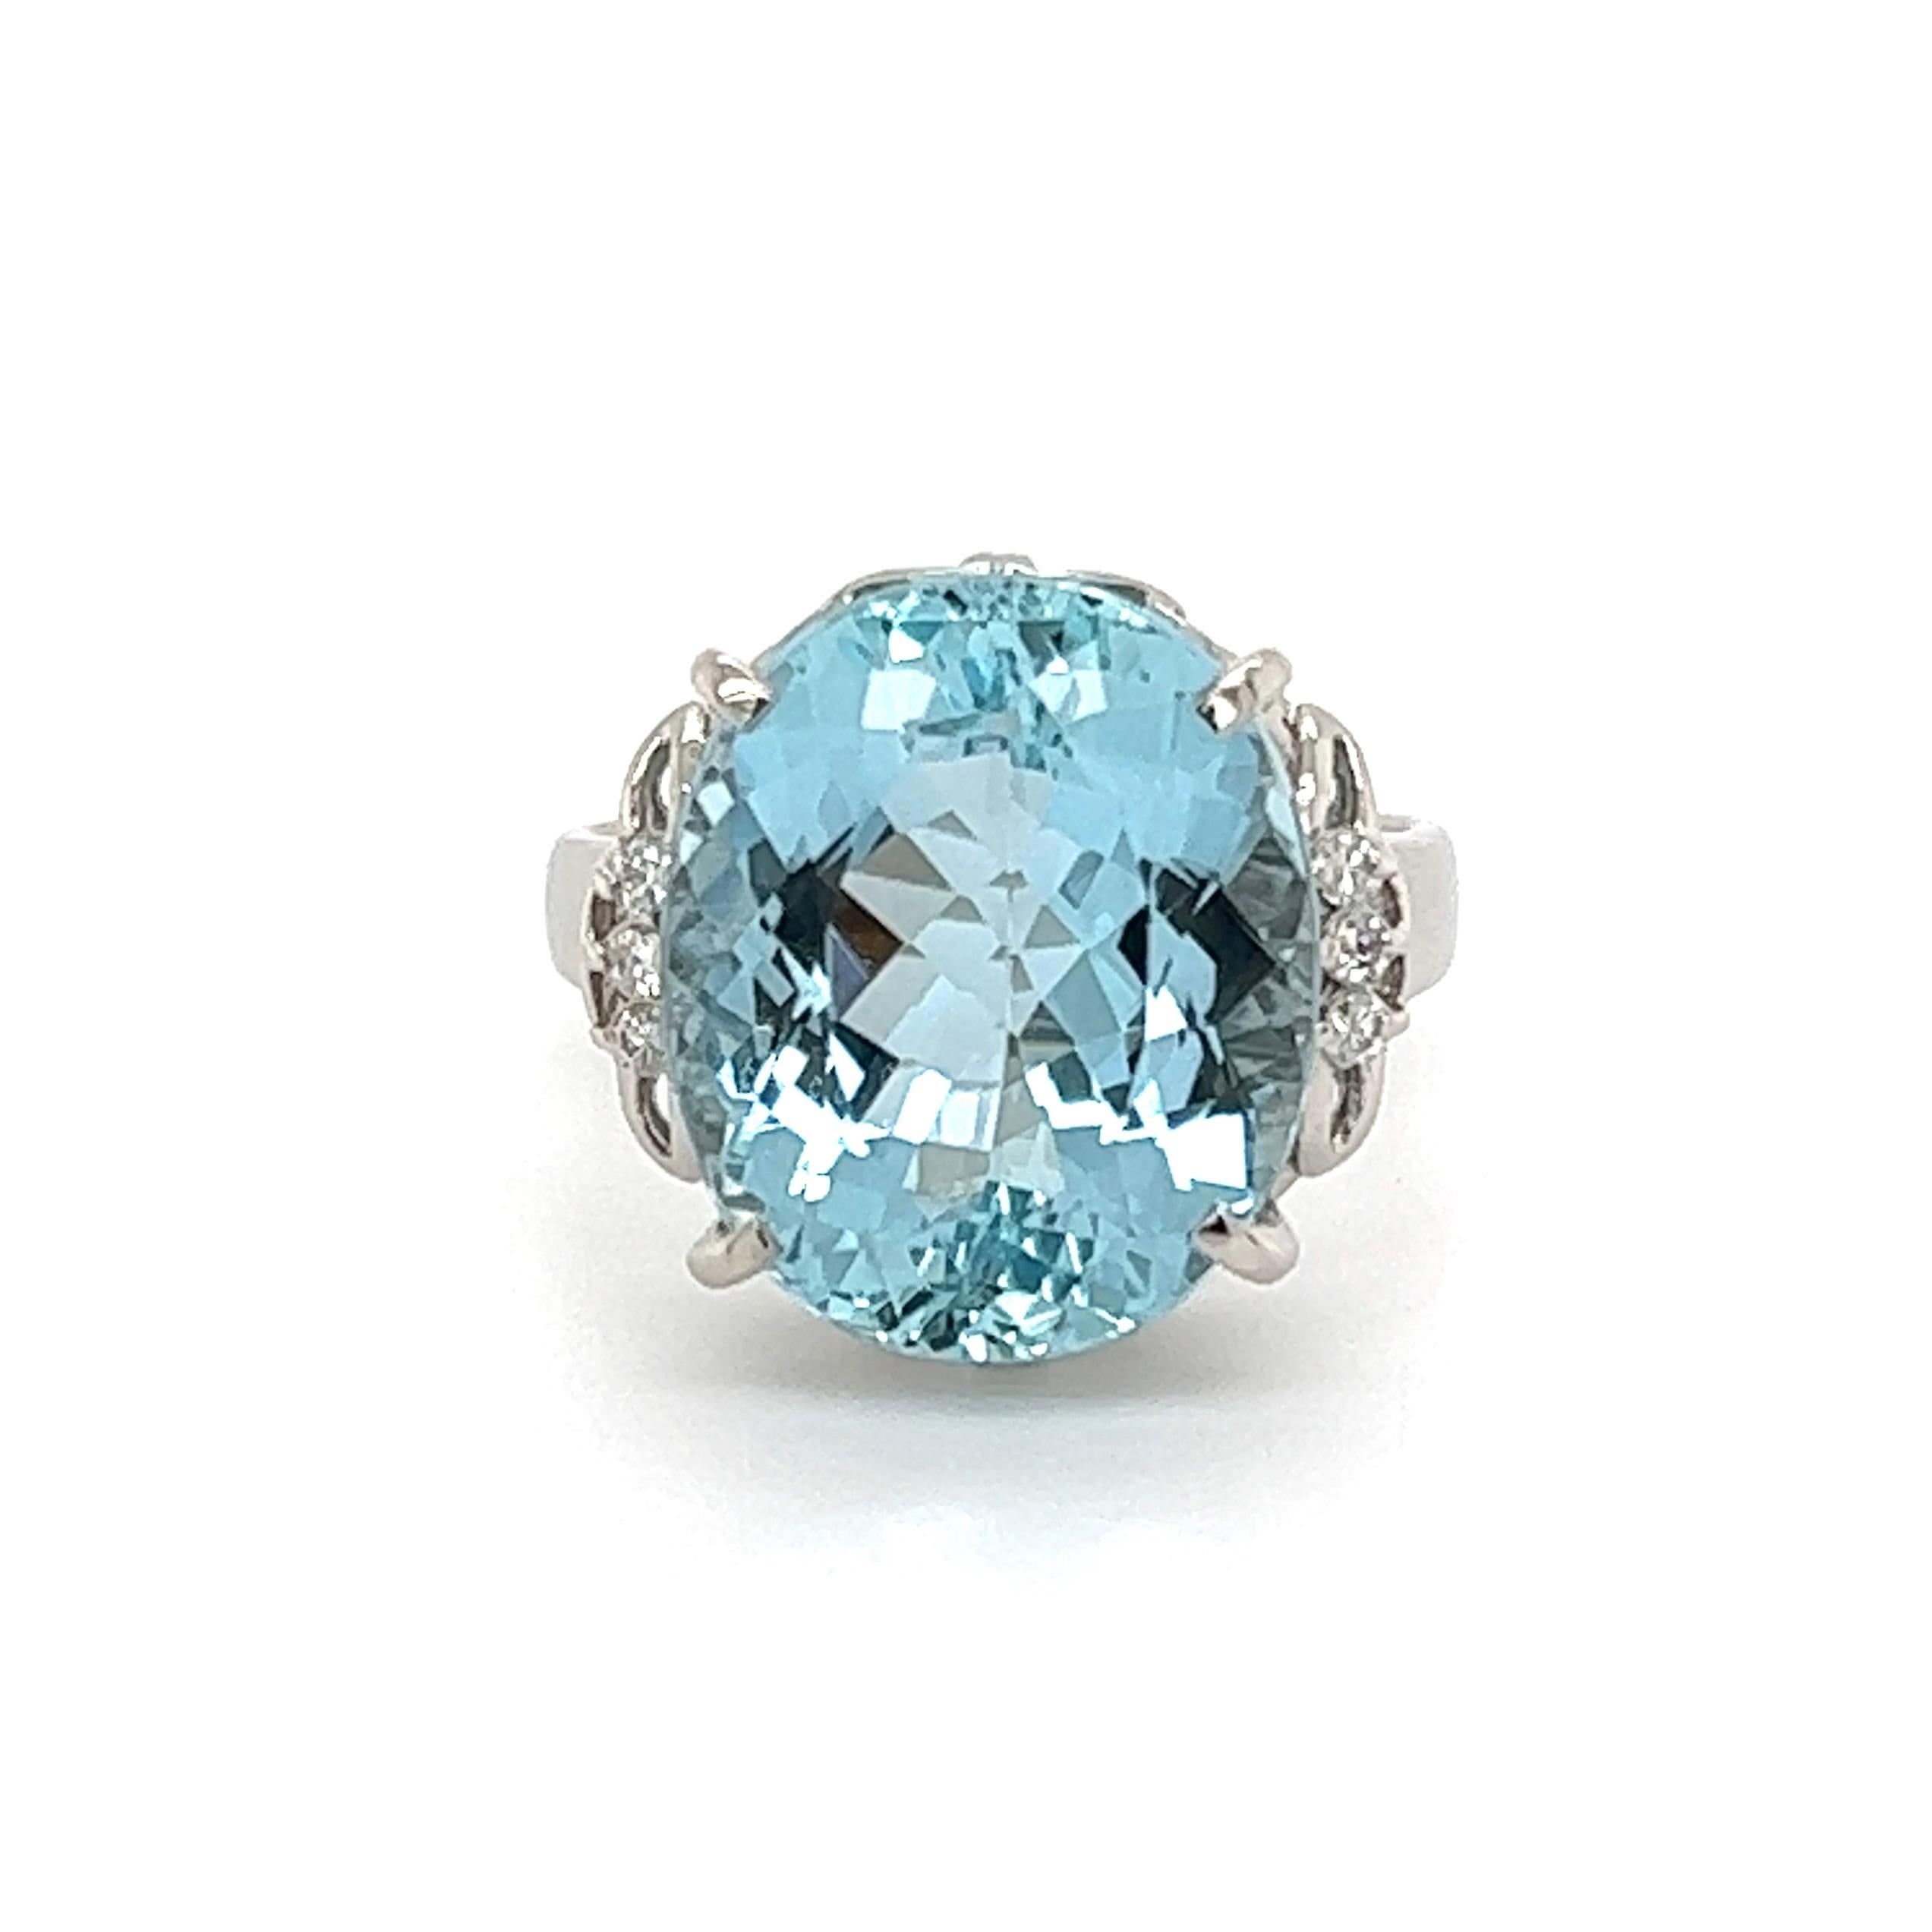 10.05 Carat Oval Aquamarine and Diamond Platinum Ring Estate Fine Jewelry In Excellent Condition For Sale In Montreal, QC